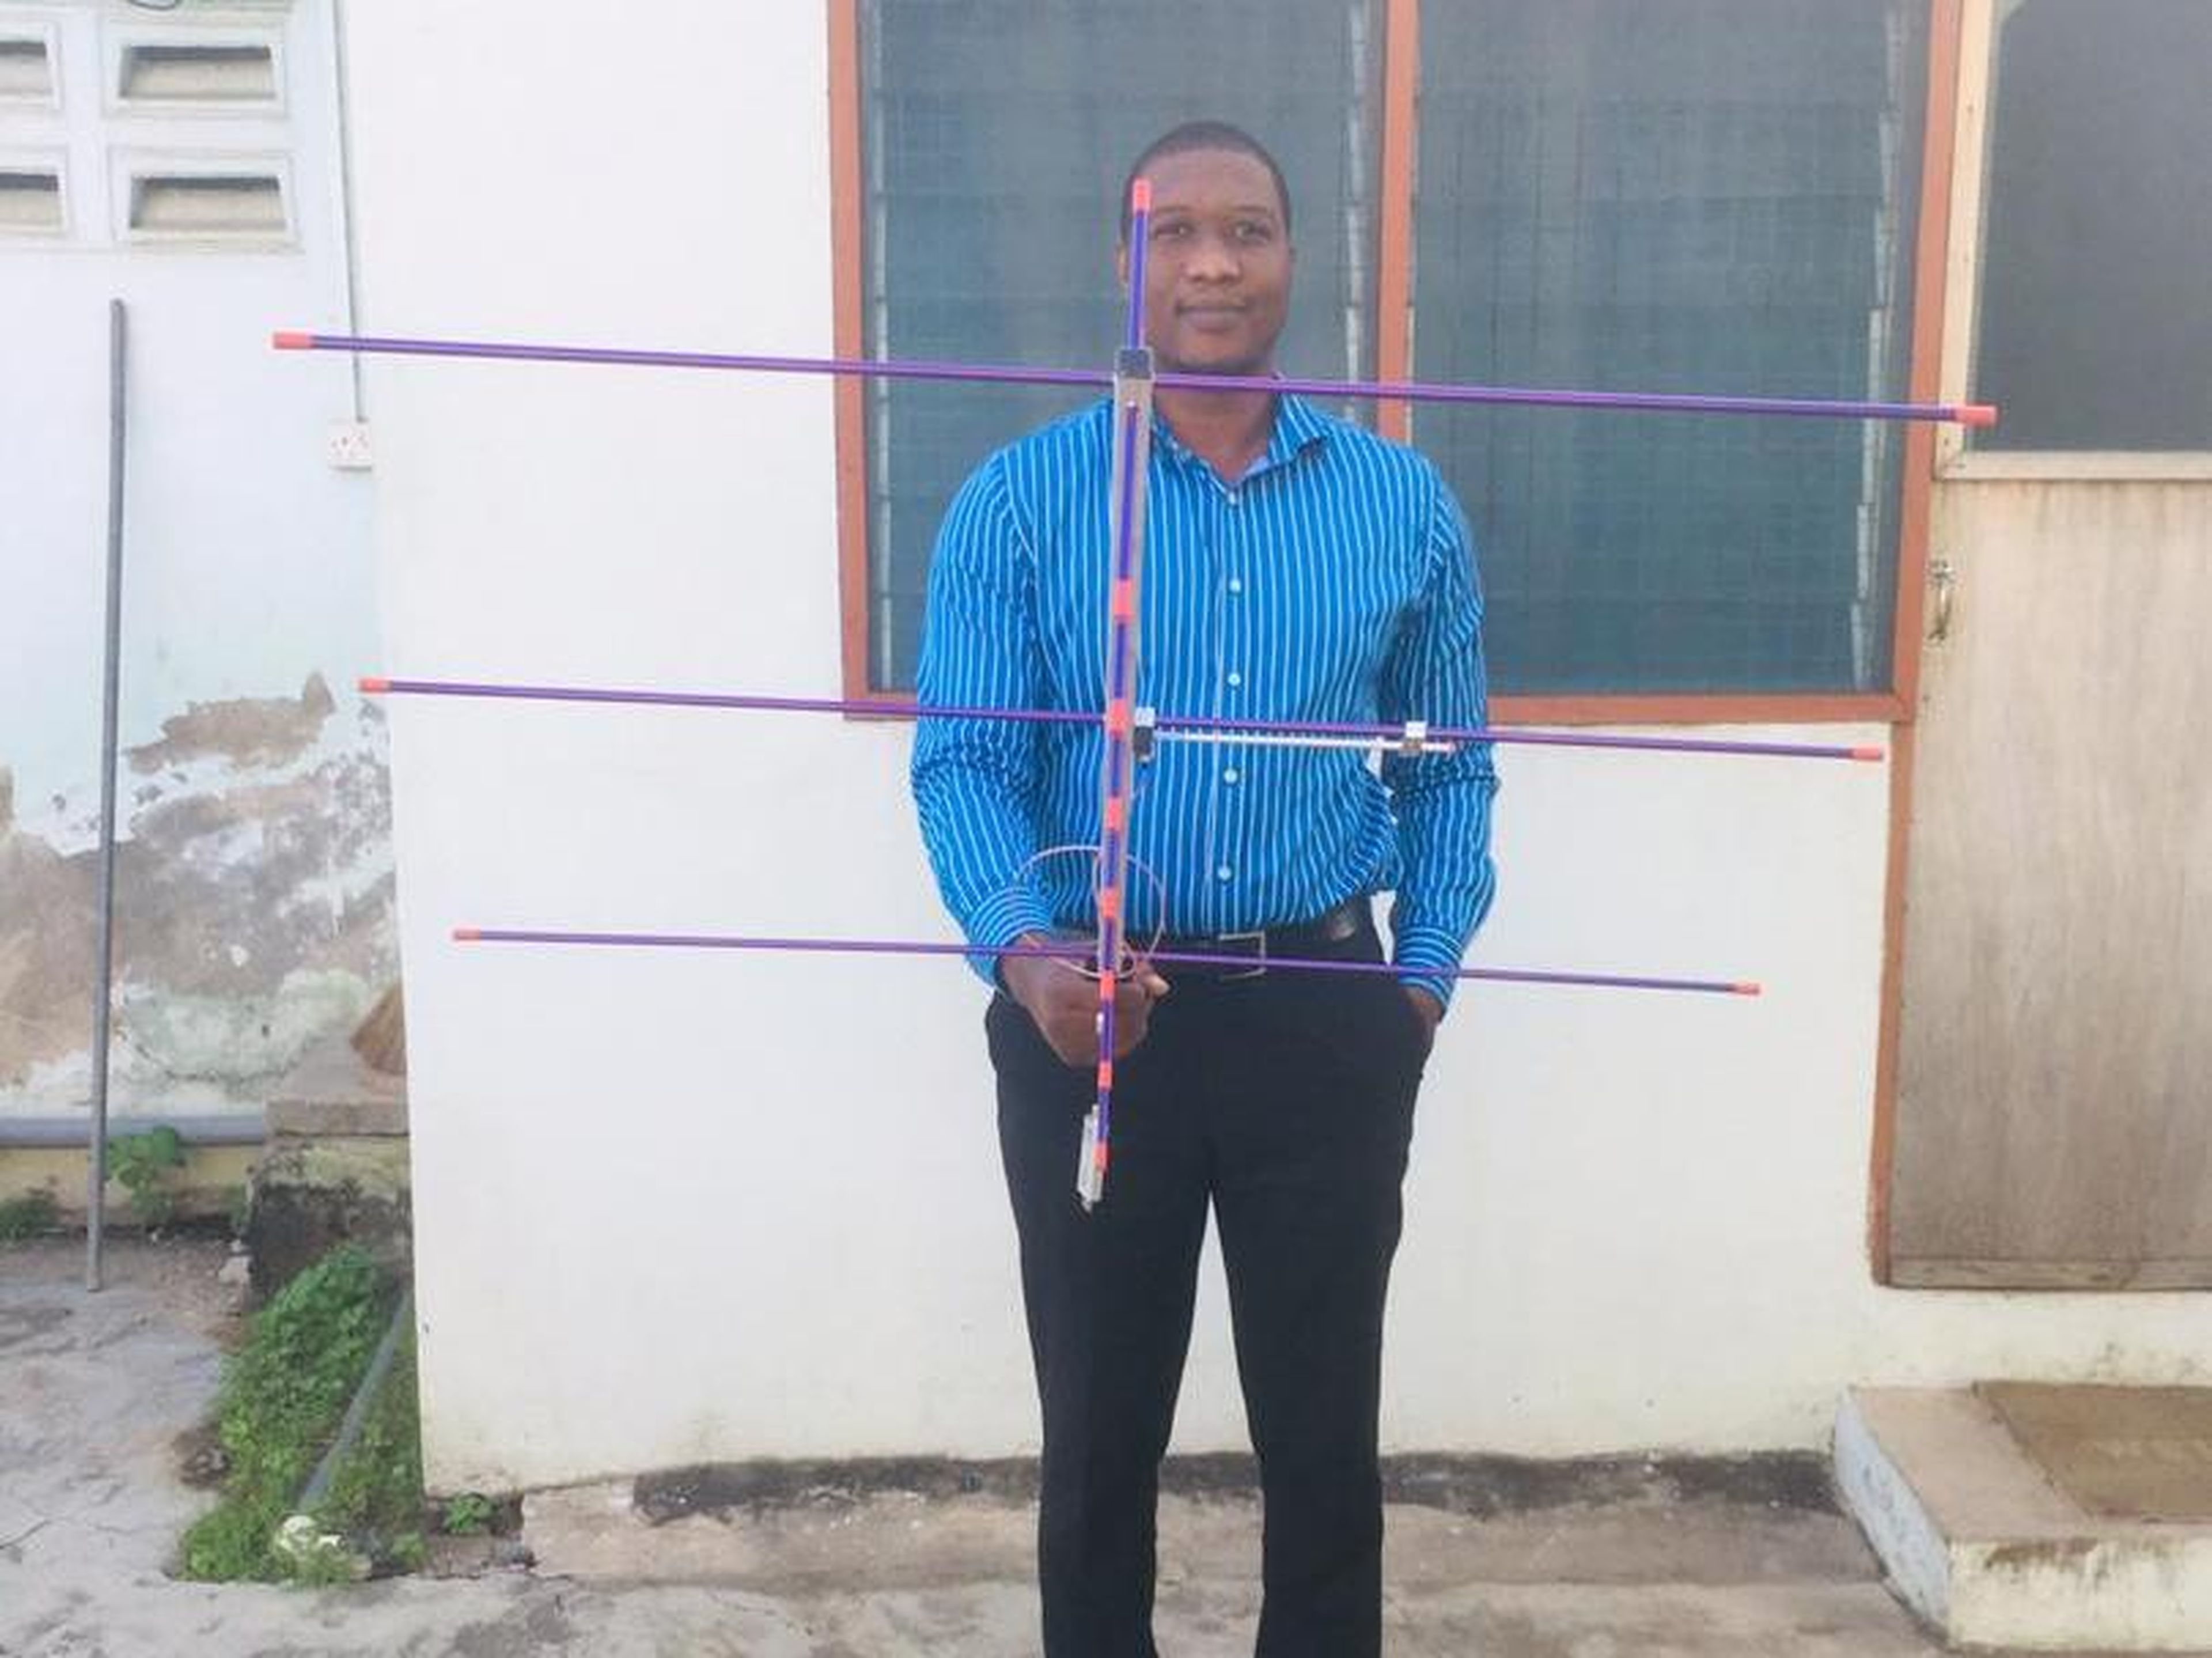 Here is Kwame "Larry" Asante holding the antenna he built to receive the MTL from the crypto space drop.